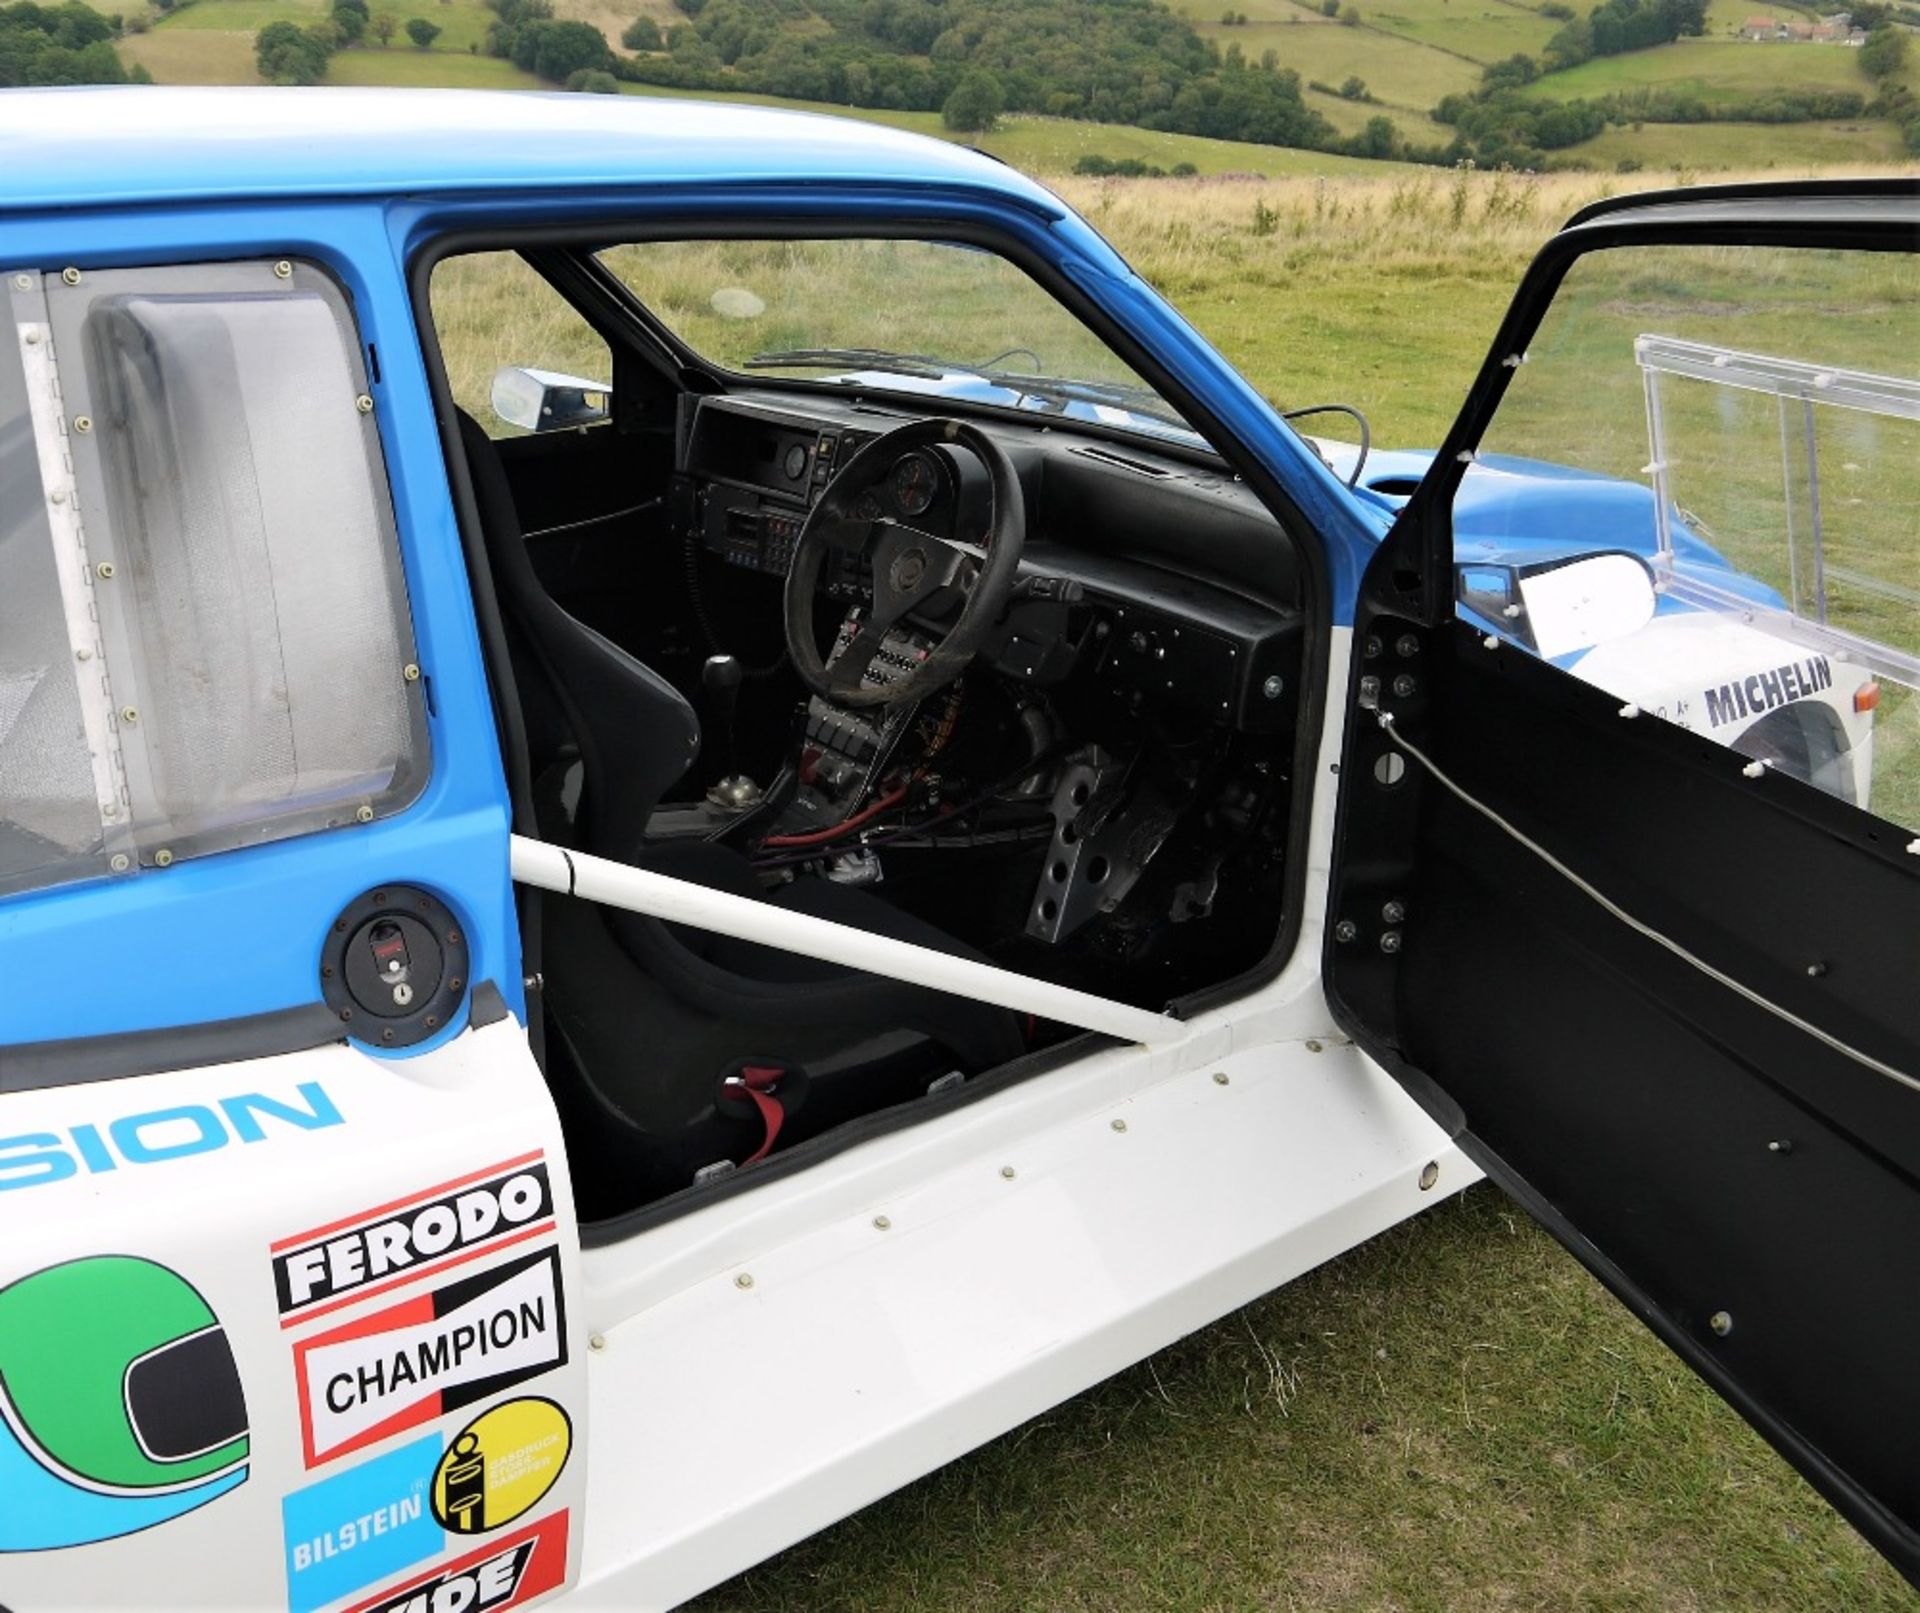 1985 MG Metro 6R4 Works Rally Car Registration Number: C874 EUD Chassis Number: #134  The MG Metro - Image 15 of 31